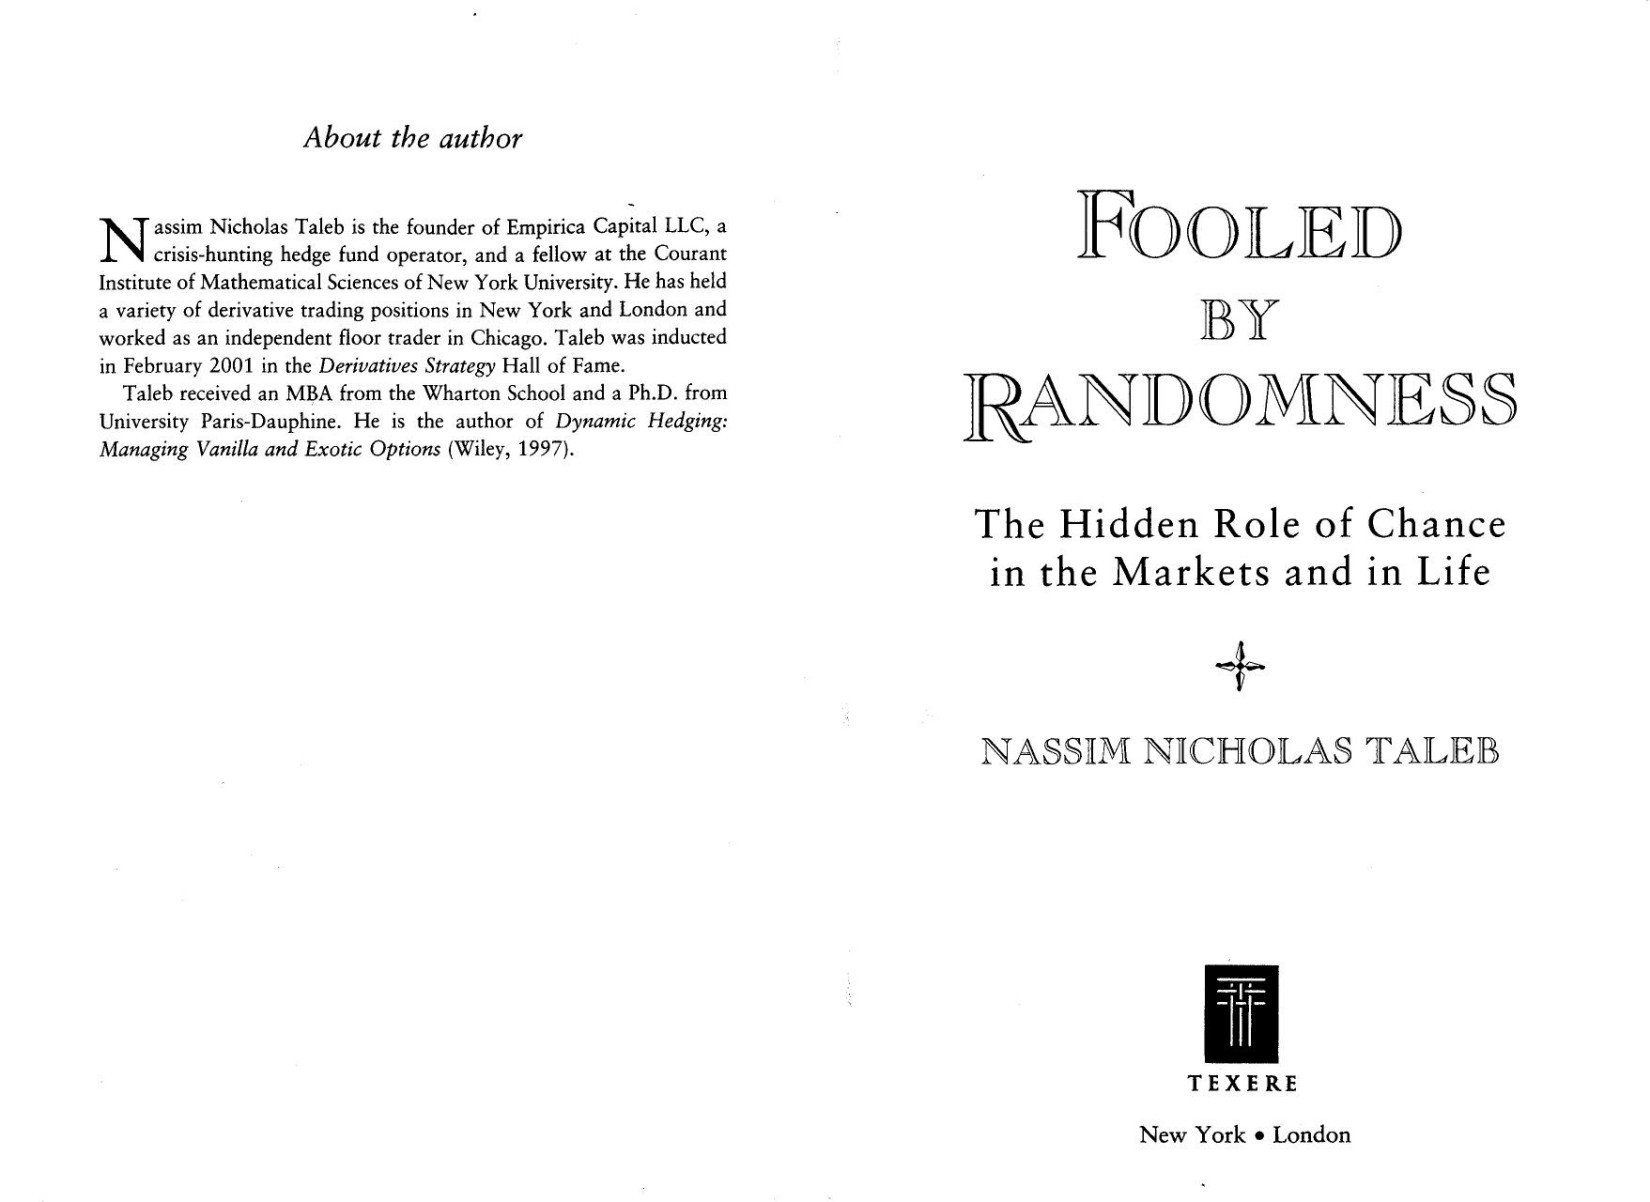 Nassim Nicholas Taleb Fooled by Randomness The Hidden Role of Chance in the Markets and in Life 2001